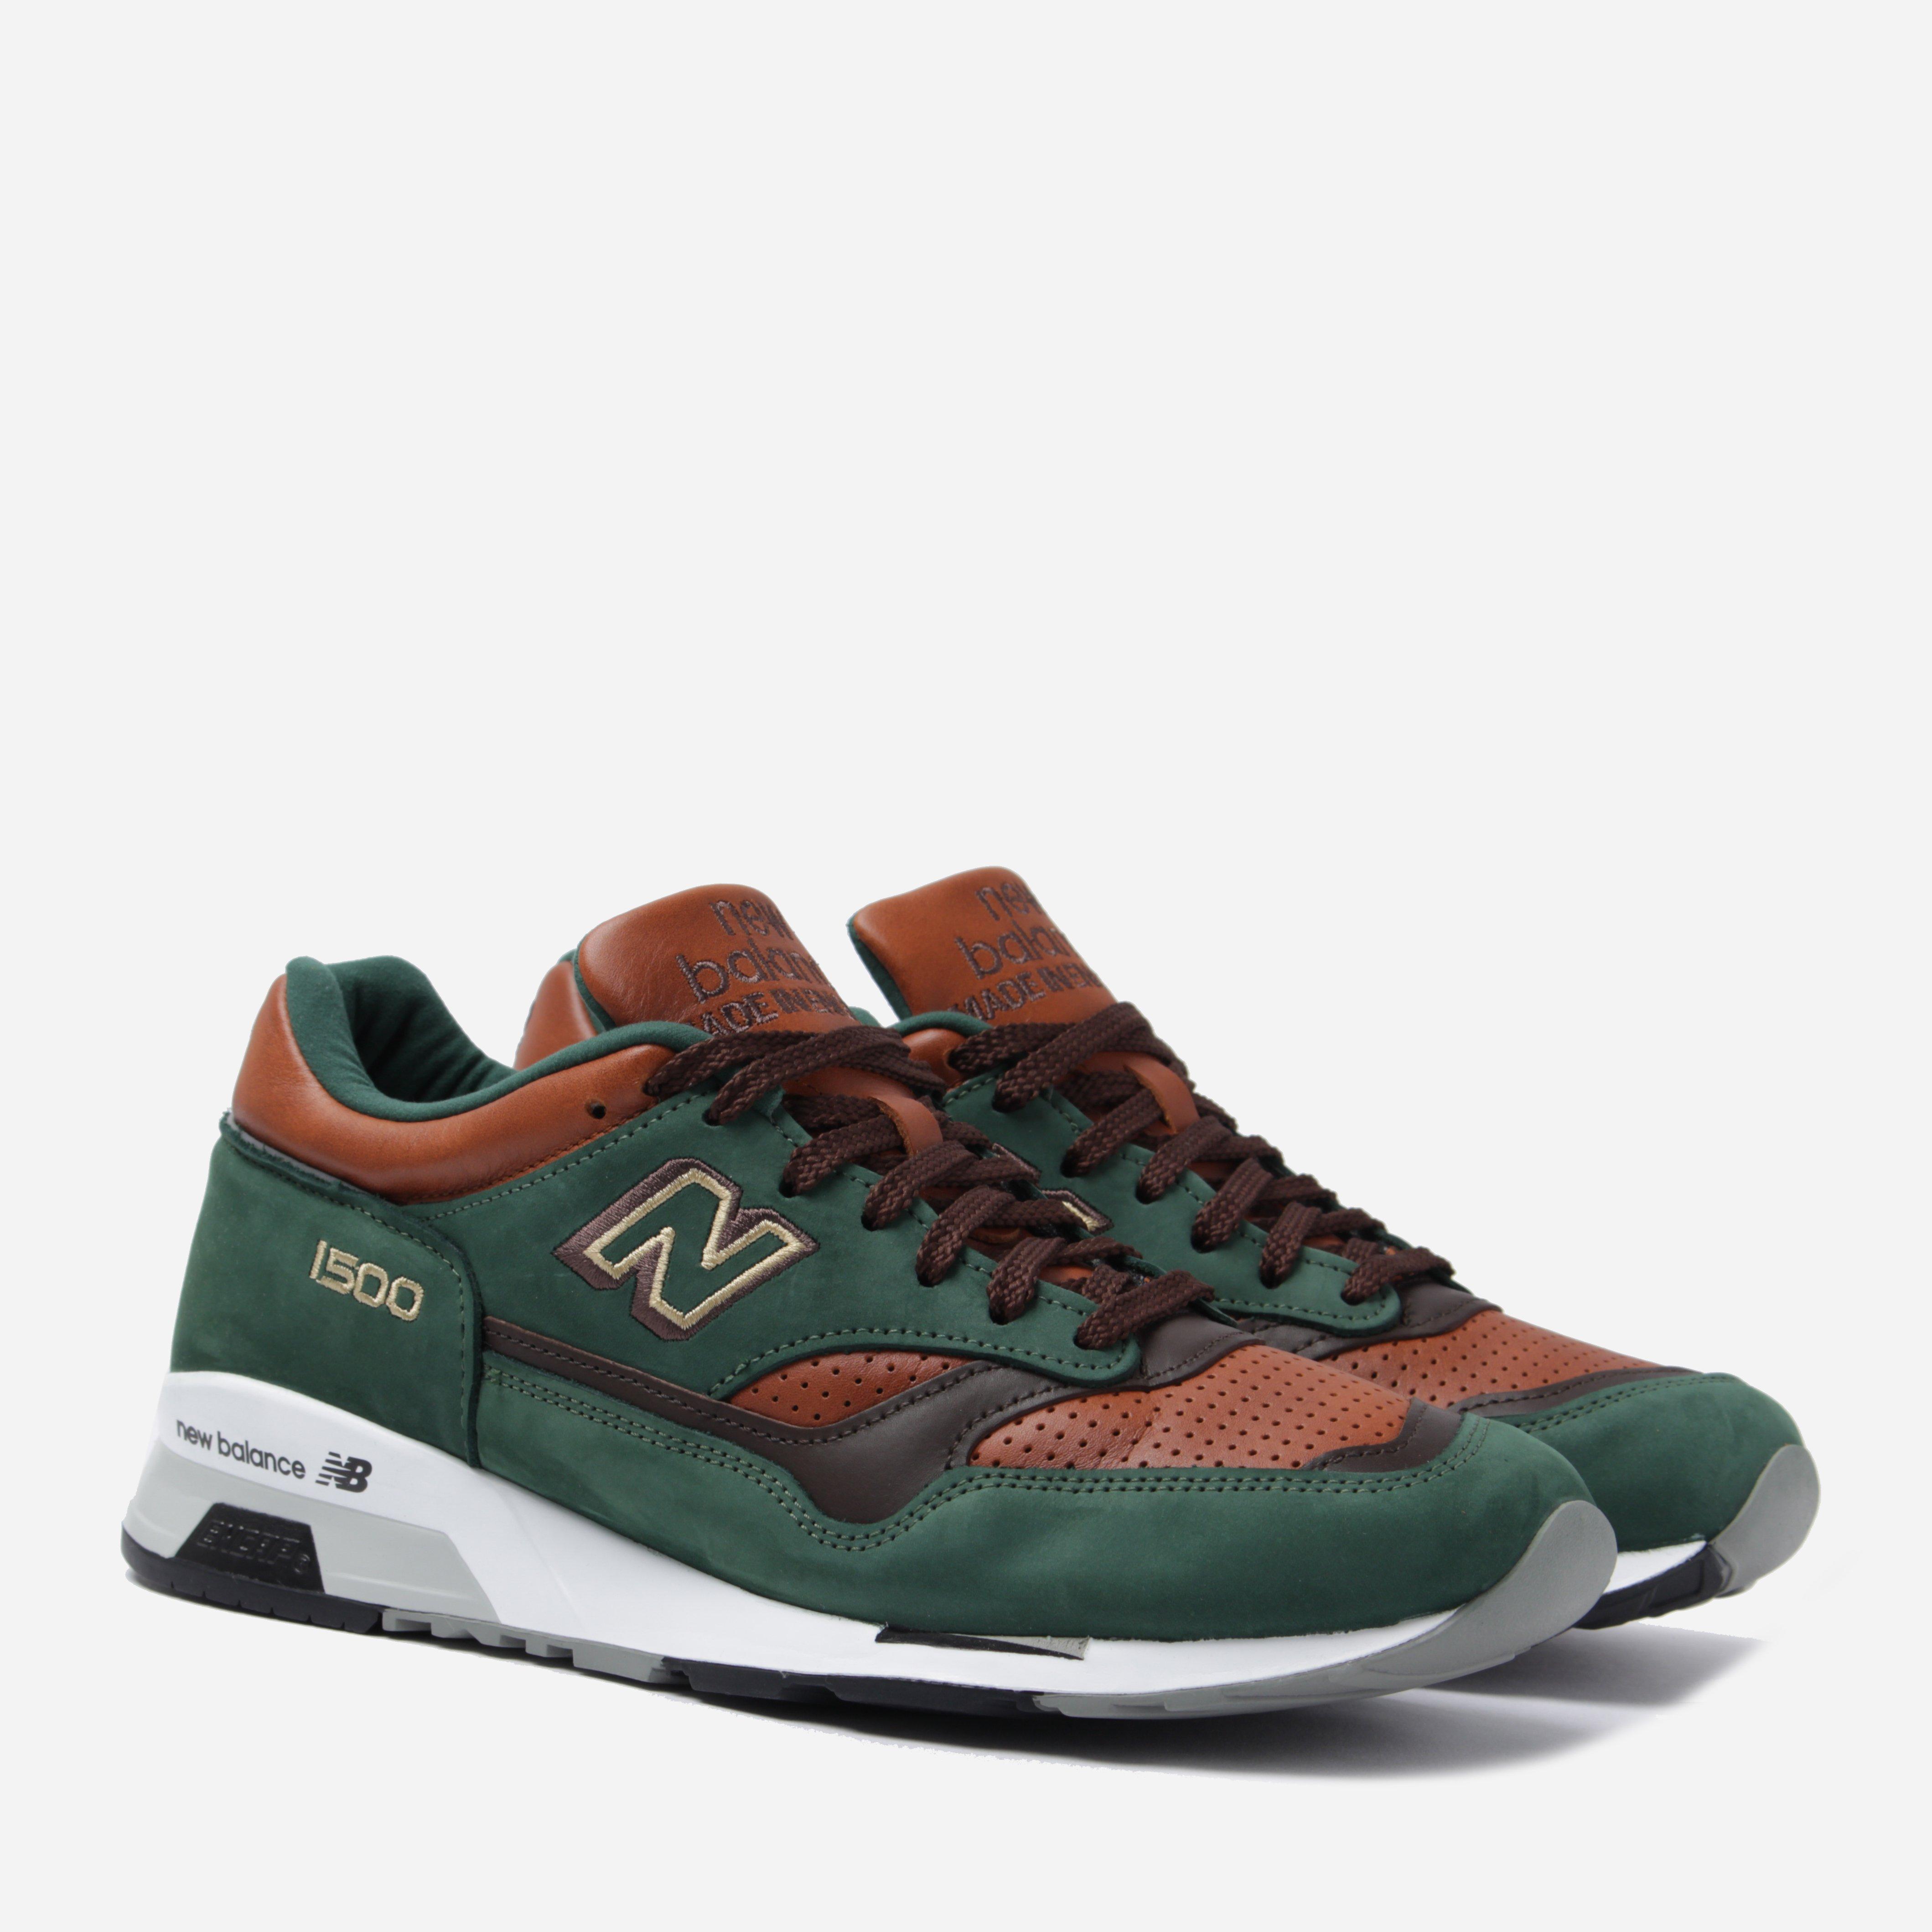 New Balance M 1500 Gt Made In England in Green for Men - Lyst